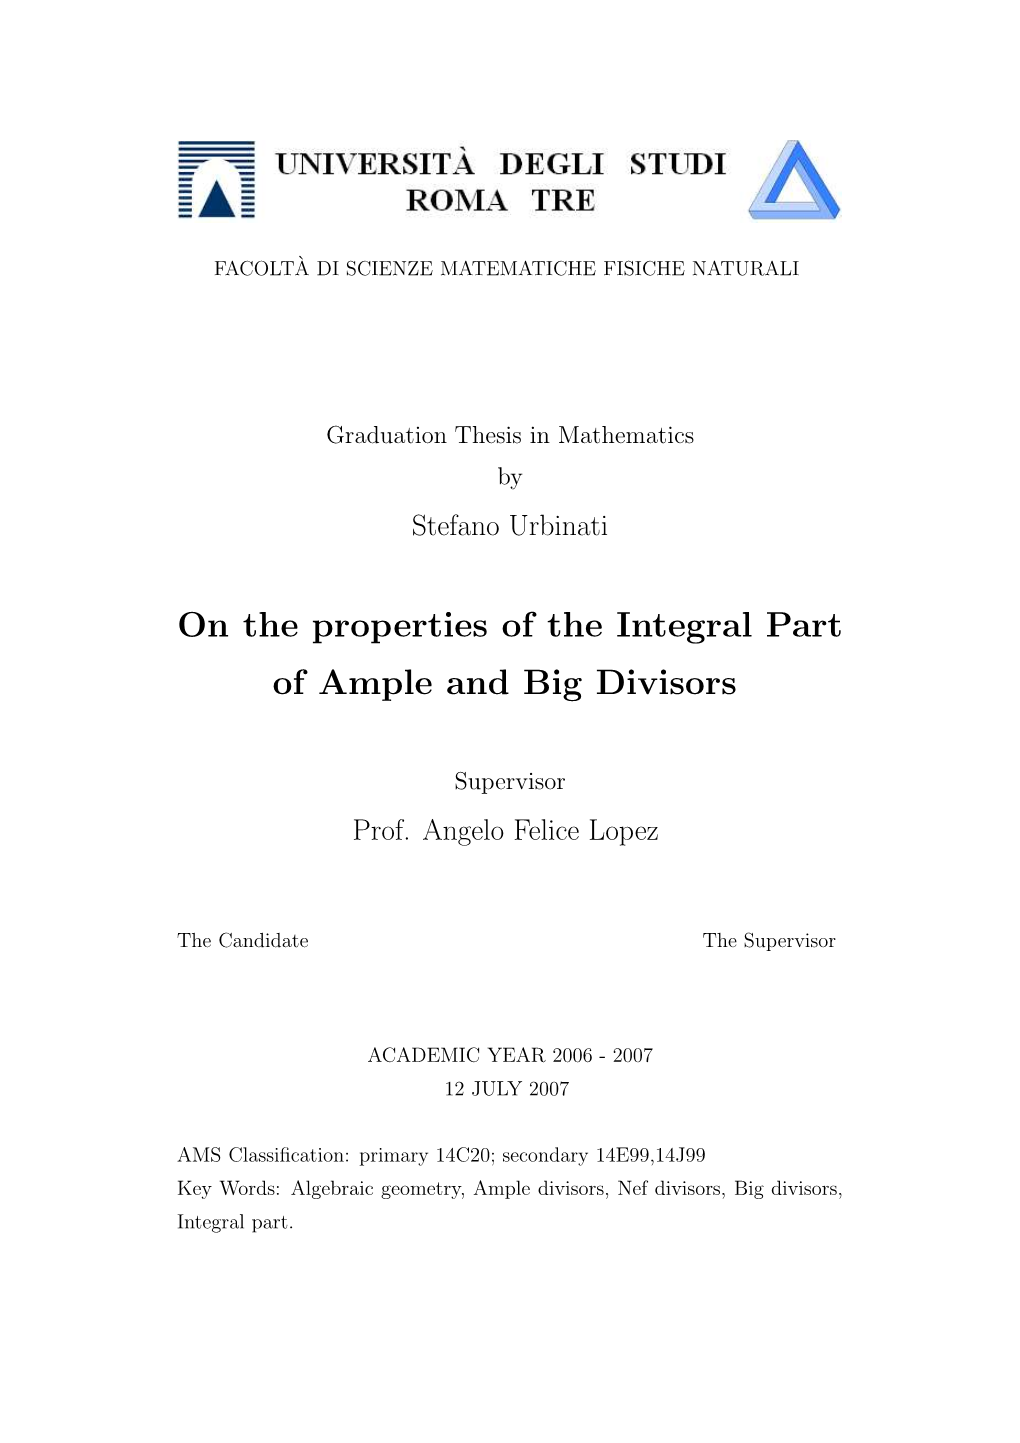 On the Properties of the Integral Part of Ample and Big Divisors